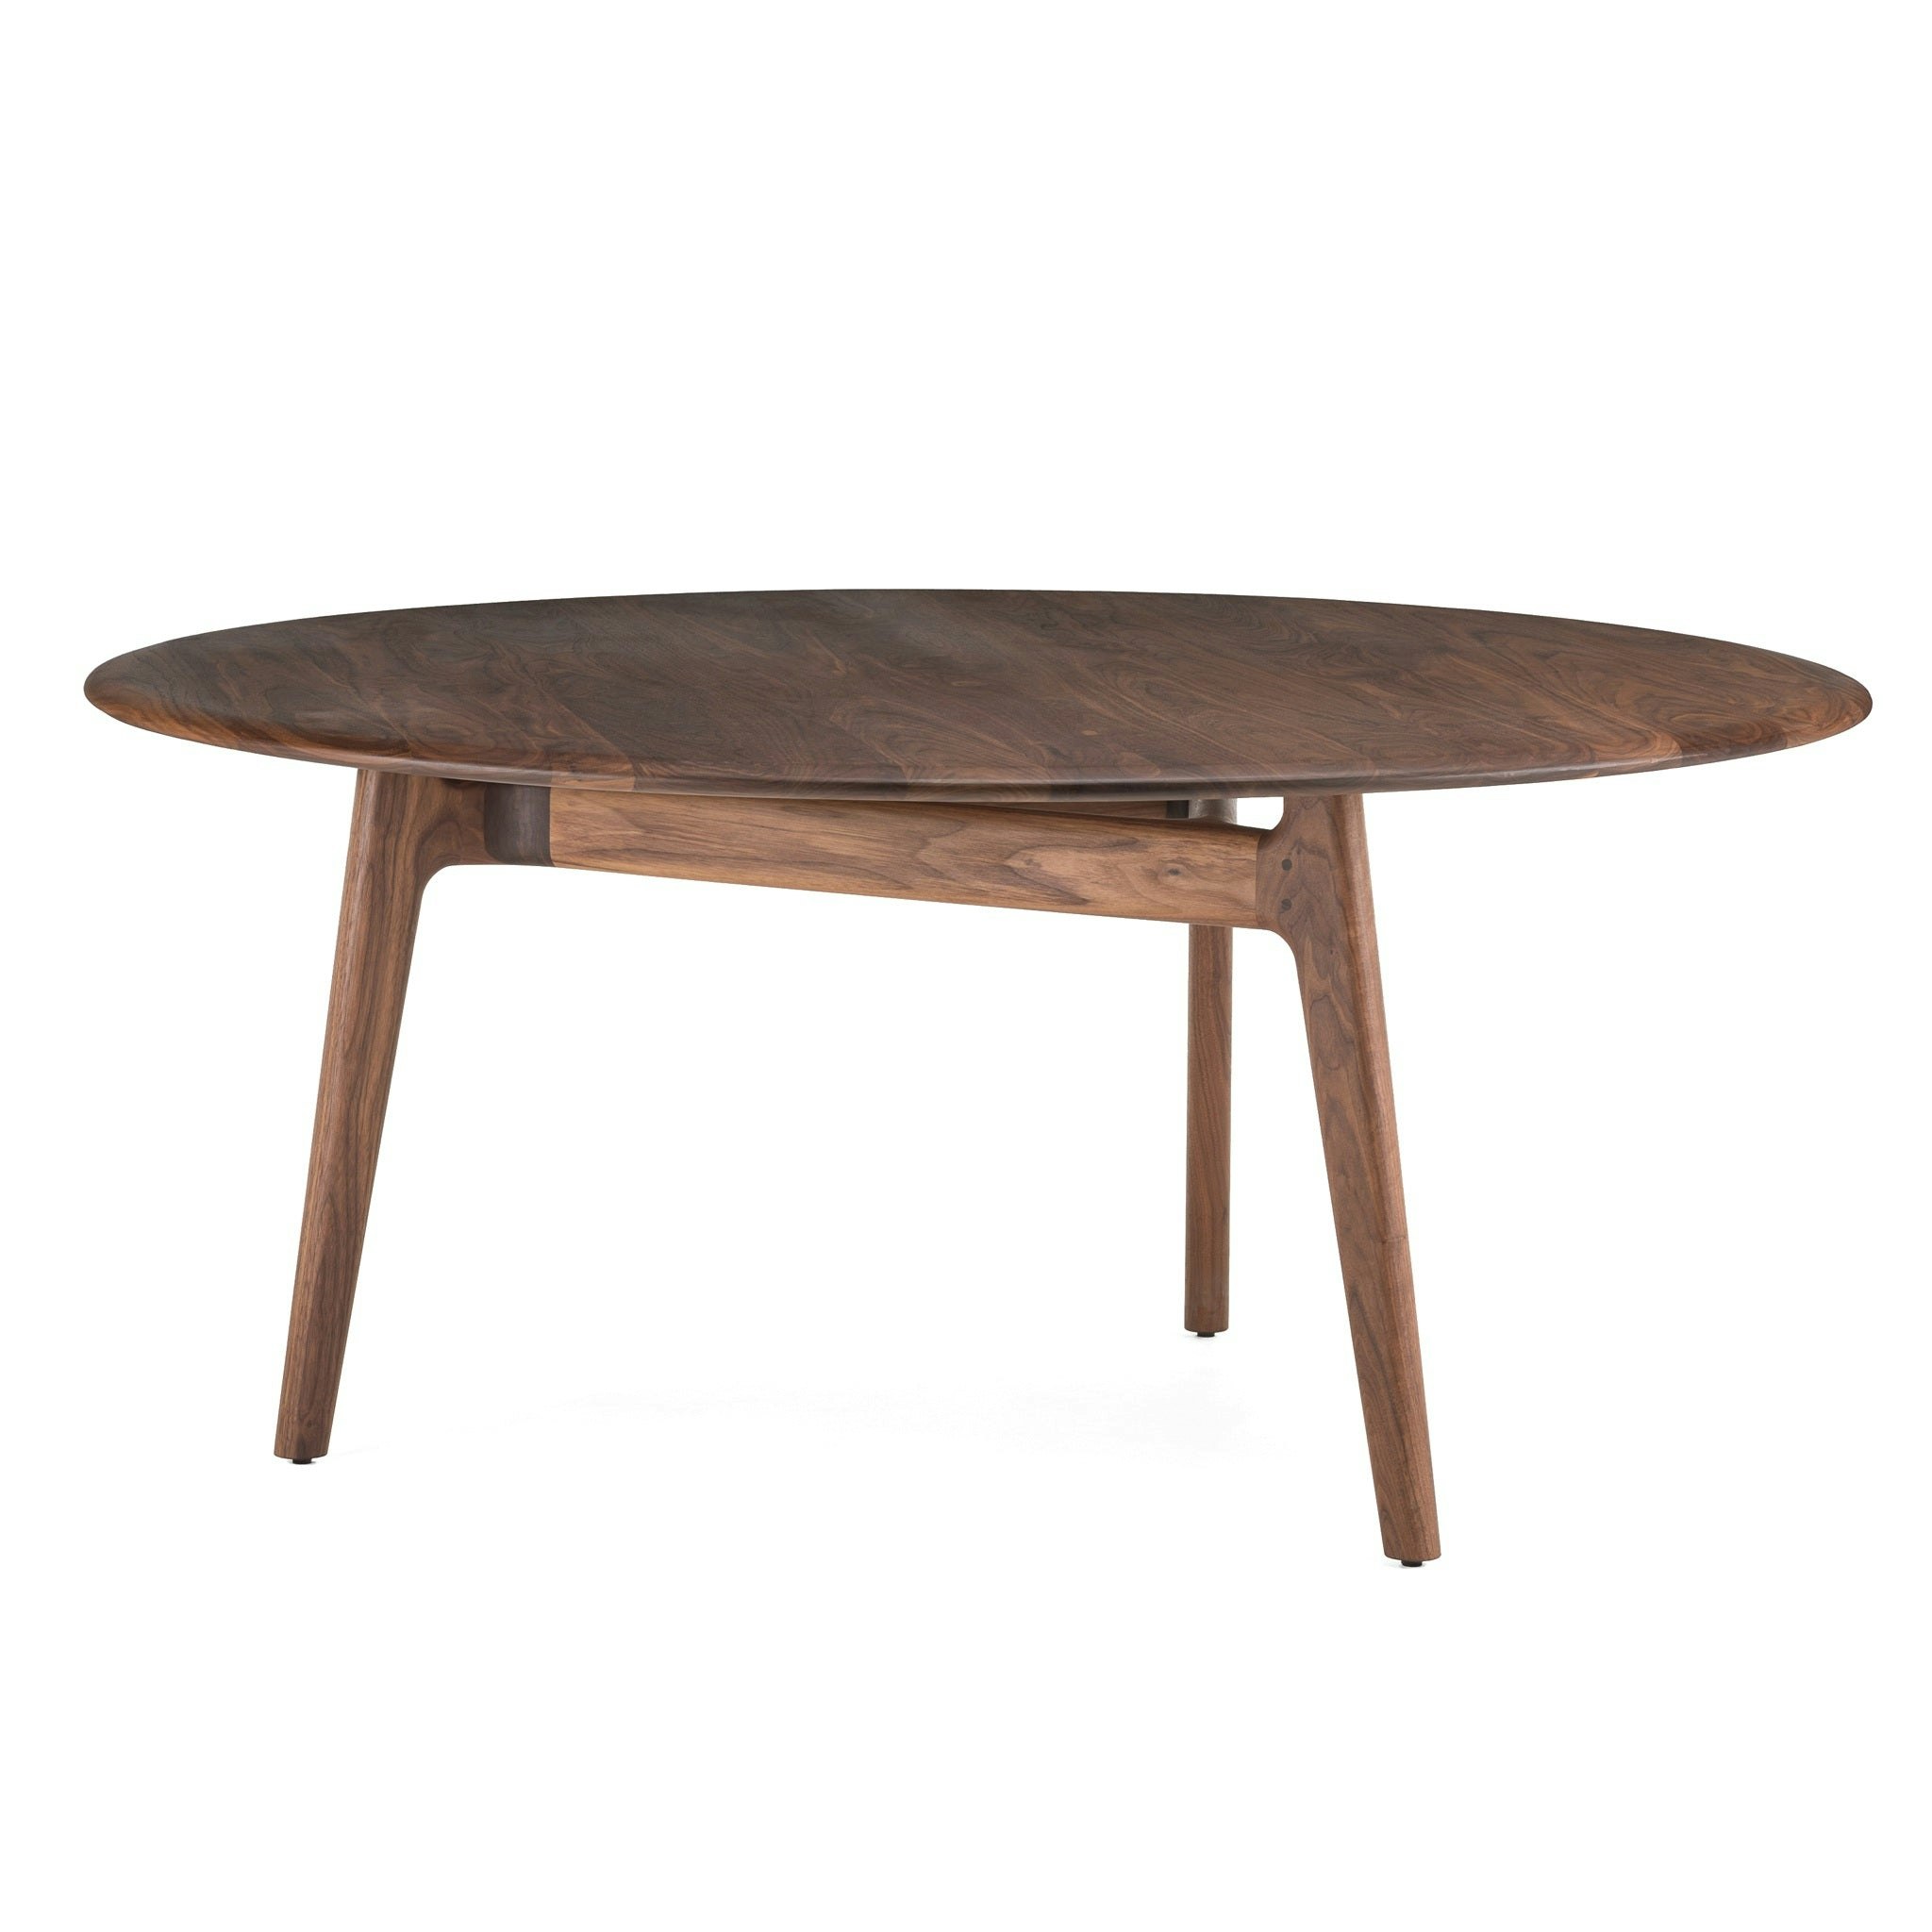 Solo Round Table by Neri & Hu